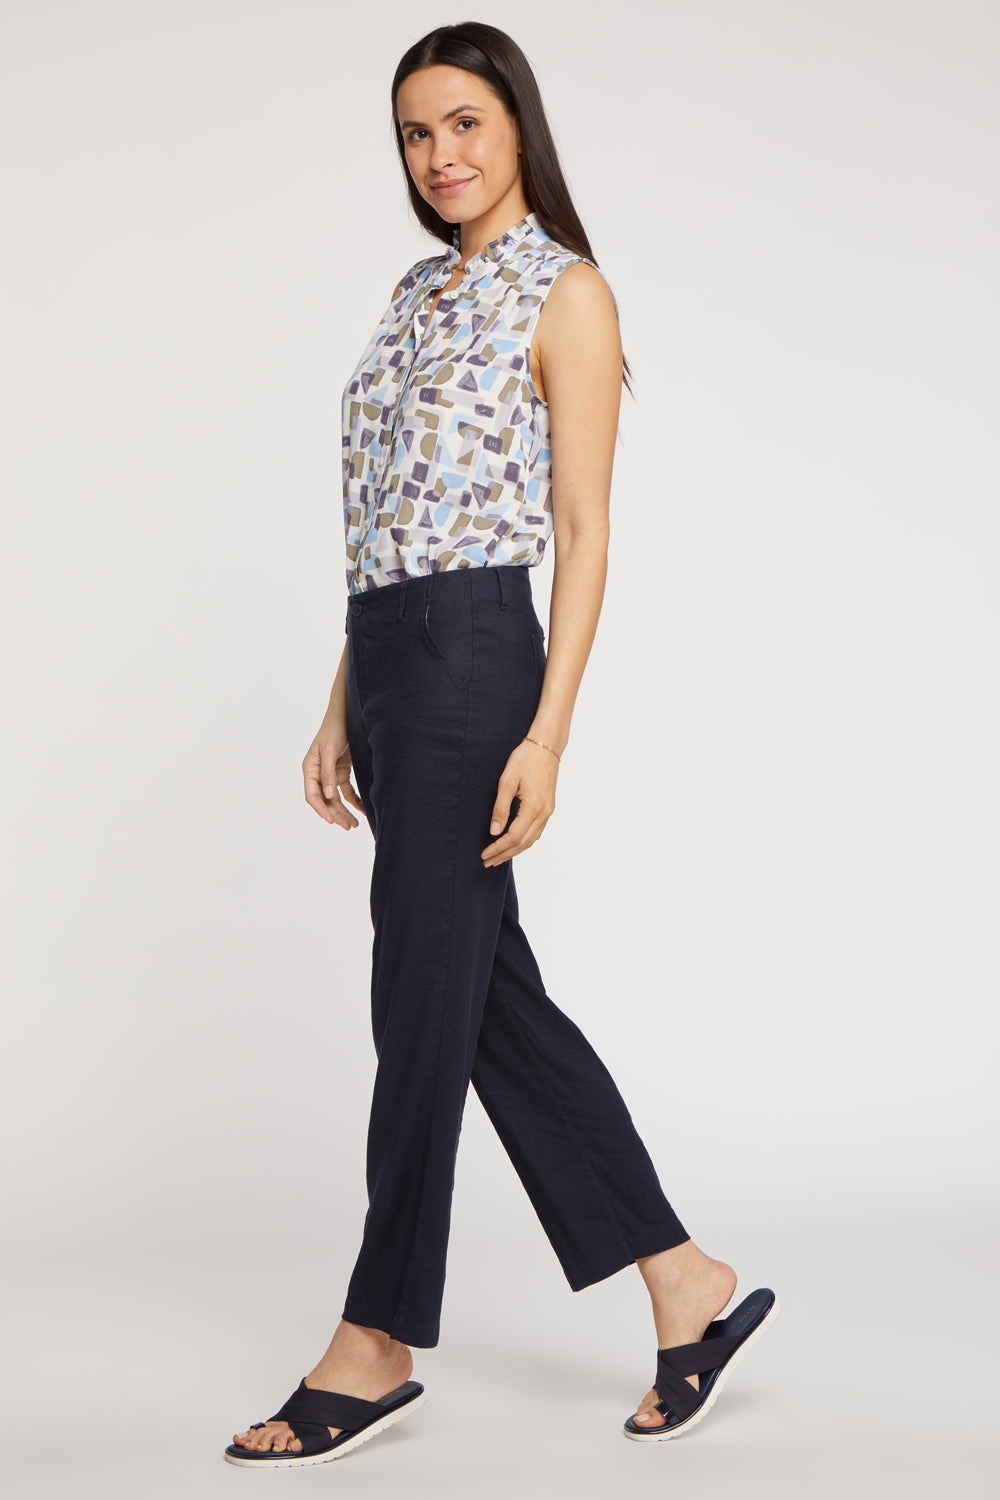 NYDJ Marilyn Straight Ankle Pants In Stretch Linen - Oxford Navy